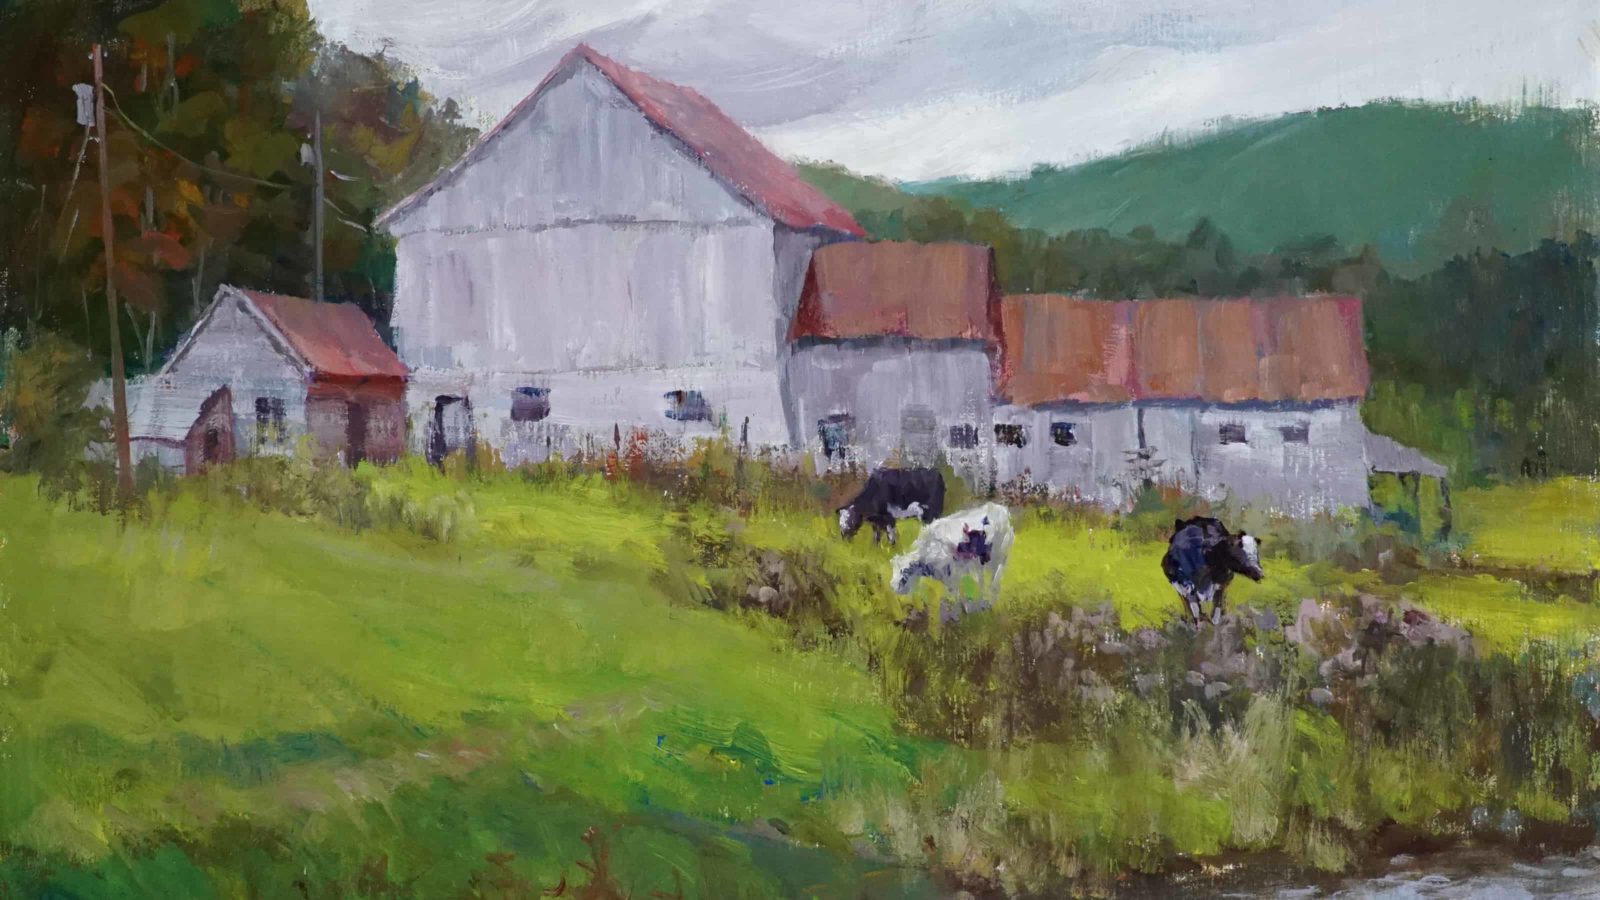 Dairy cows graze out to pasture in Joe Anna Arnett's painting 'Barns on the Battenkill' at the Southern Vermont Arts Center in Manchester, Vt., in summer 2018.